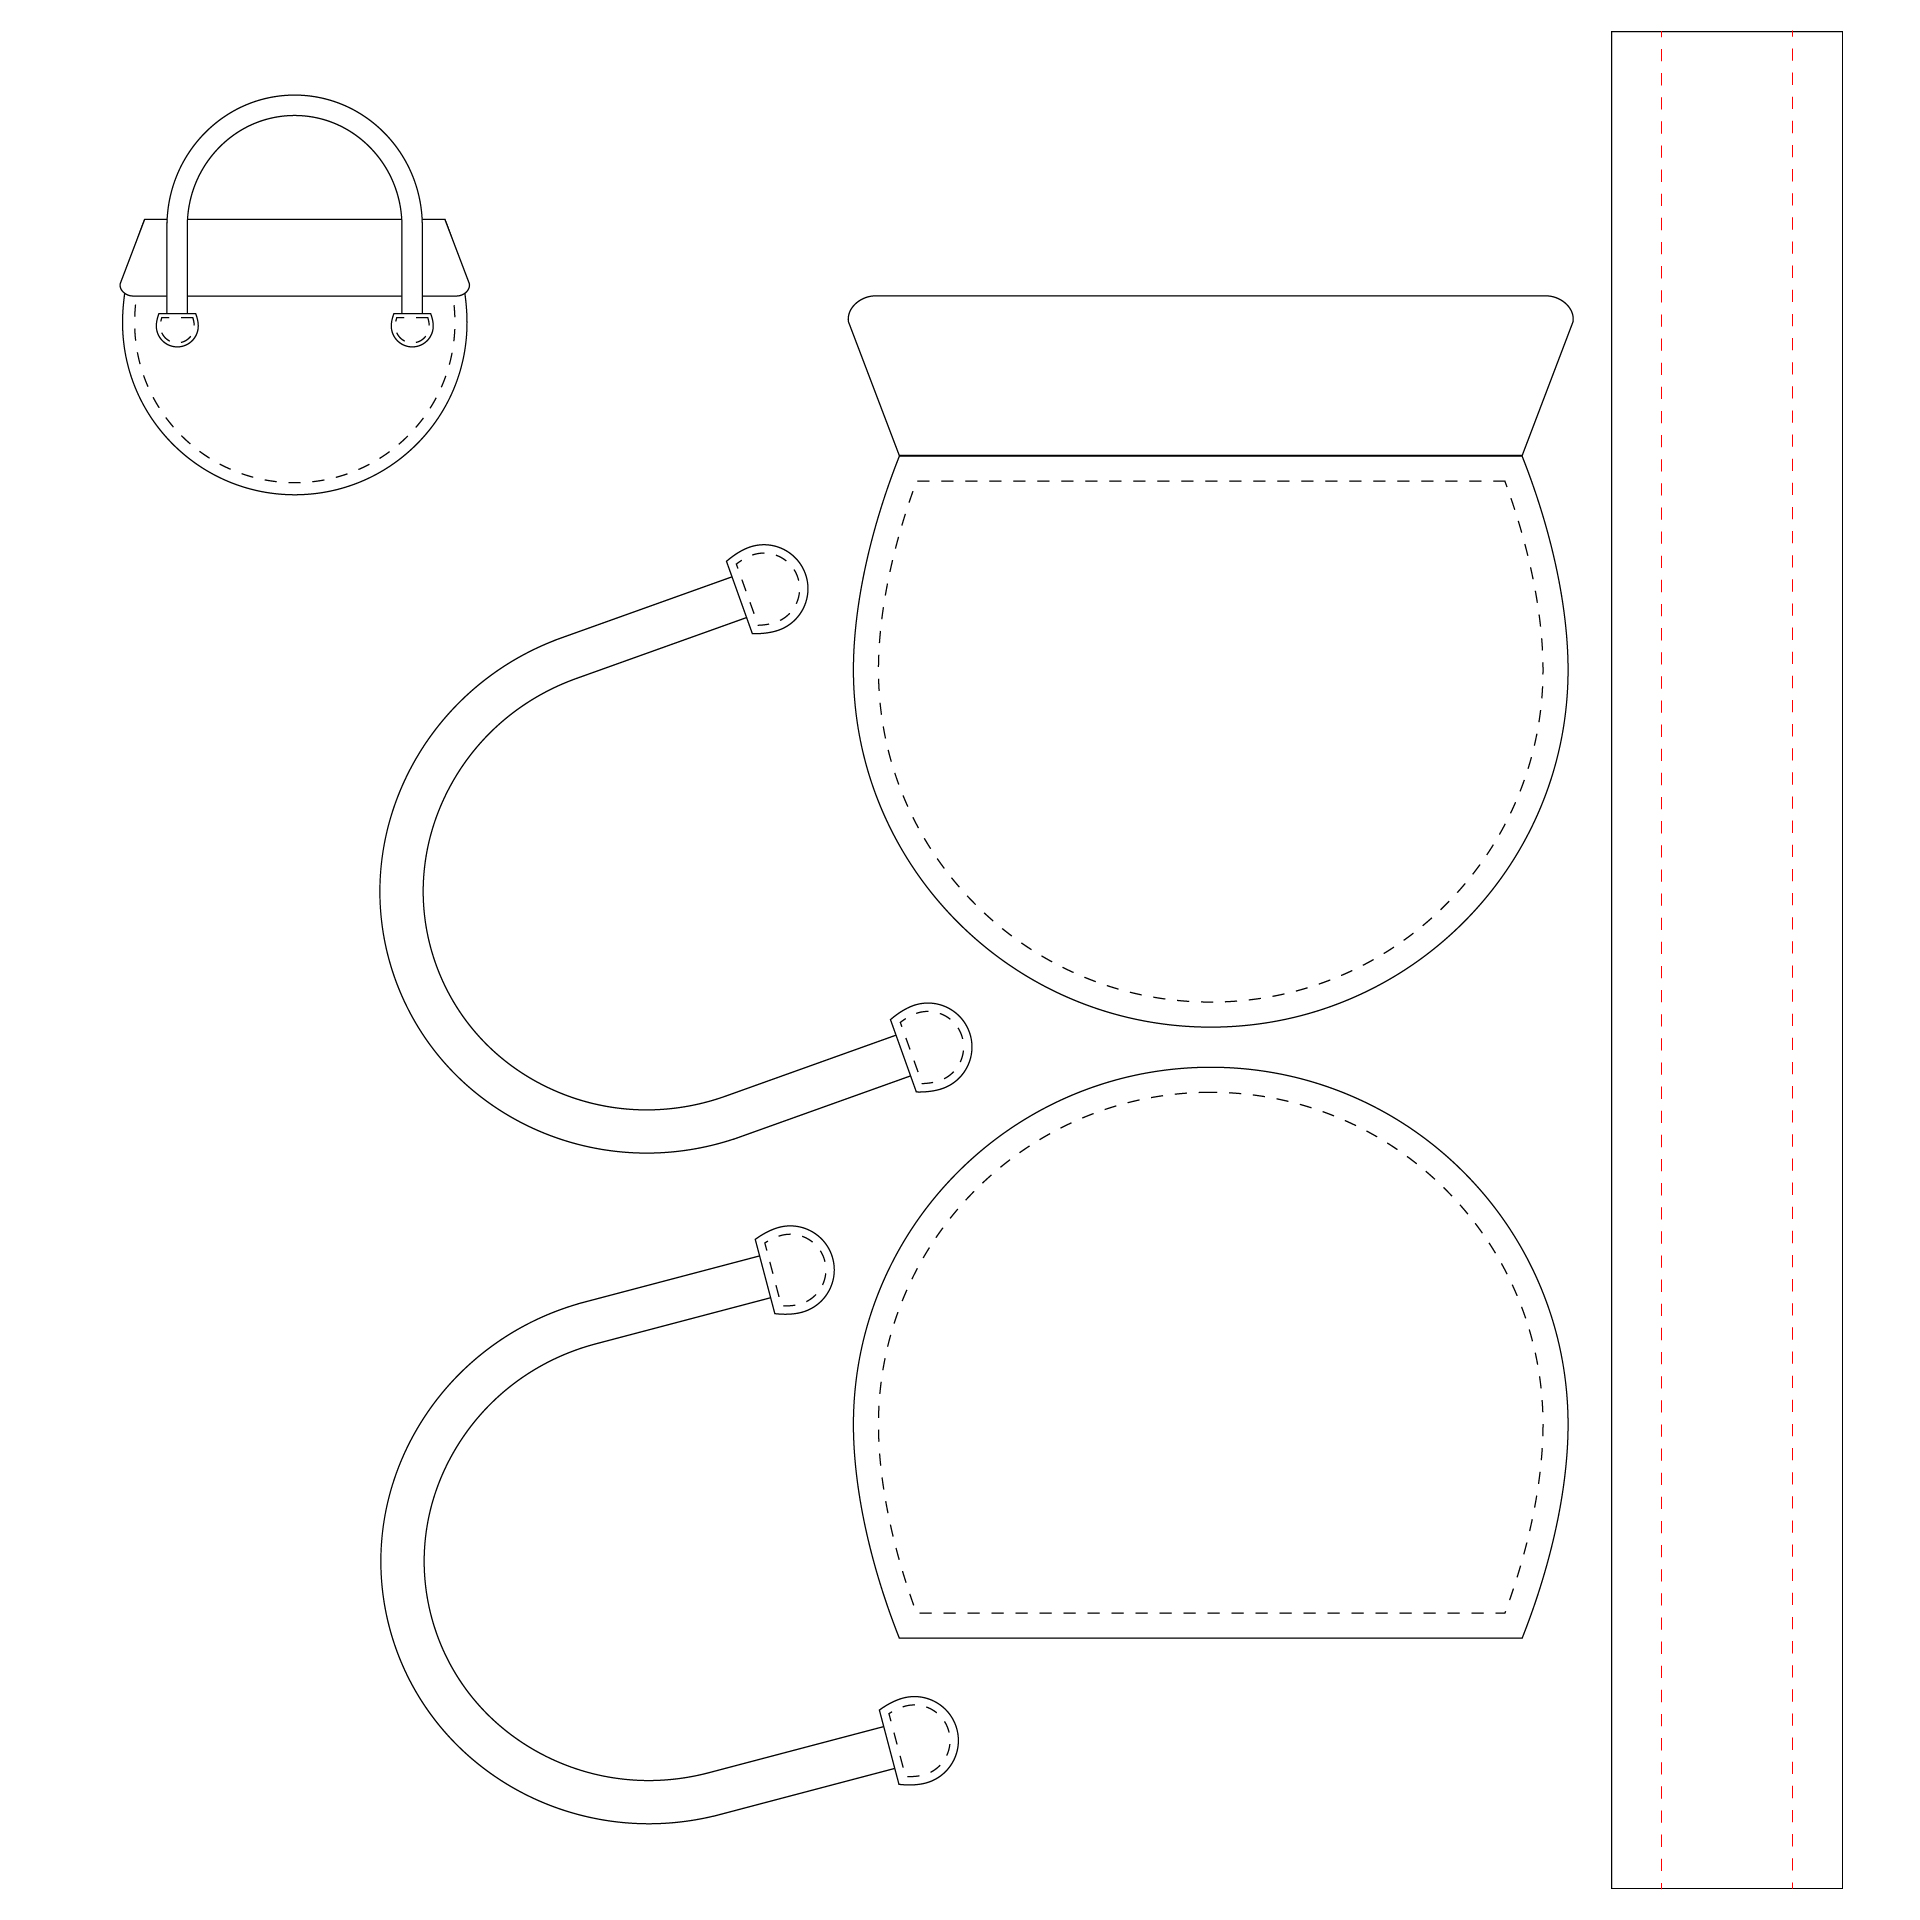 7 Best Images of Leather Handbag Patterns Printable - Free Leather ...